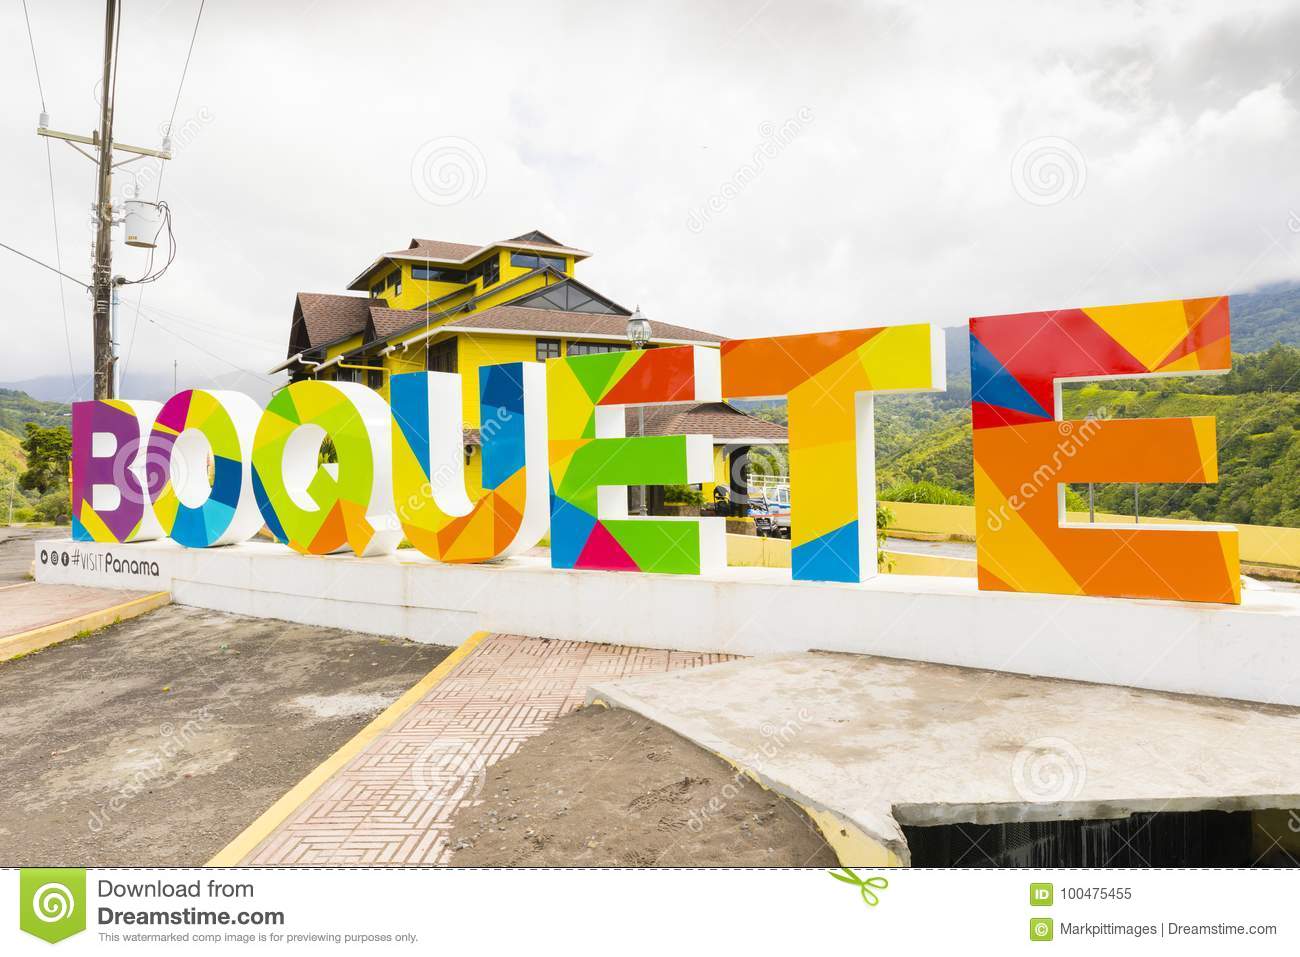 august-entrance-to-mountain-village-boquete-chiriqui-province-panama-you-will-find-series-large-letters-100475455.jpg